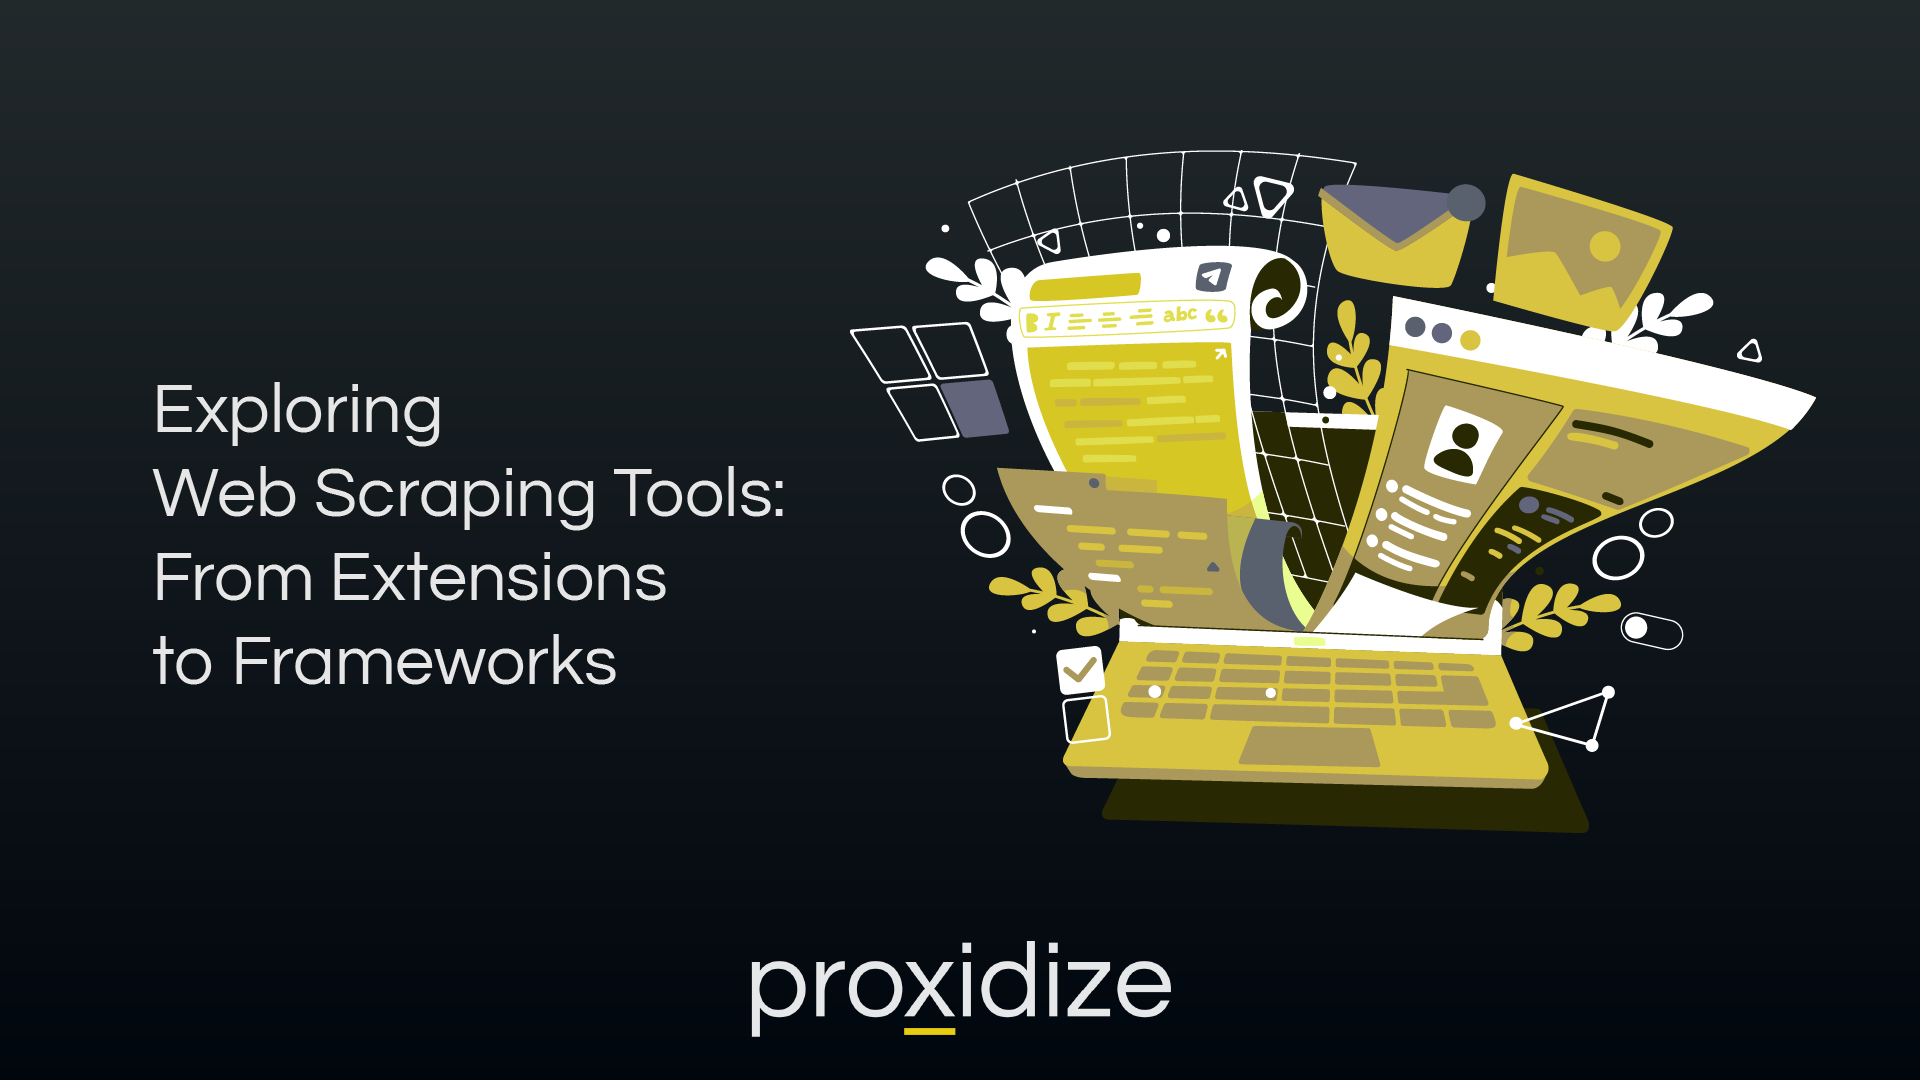 Exploring Web Scraping Tools: From Extensions to Frameworks